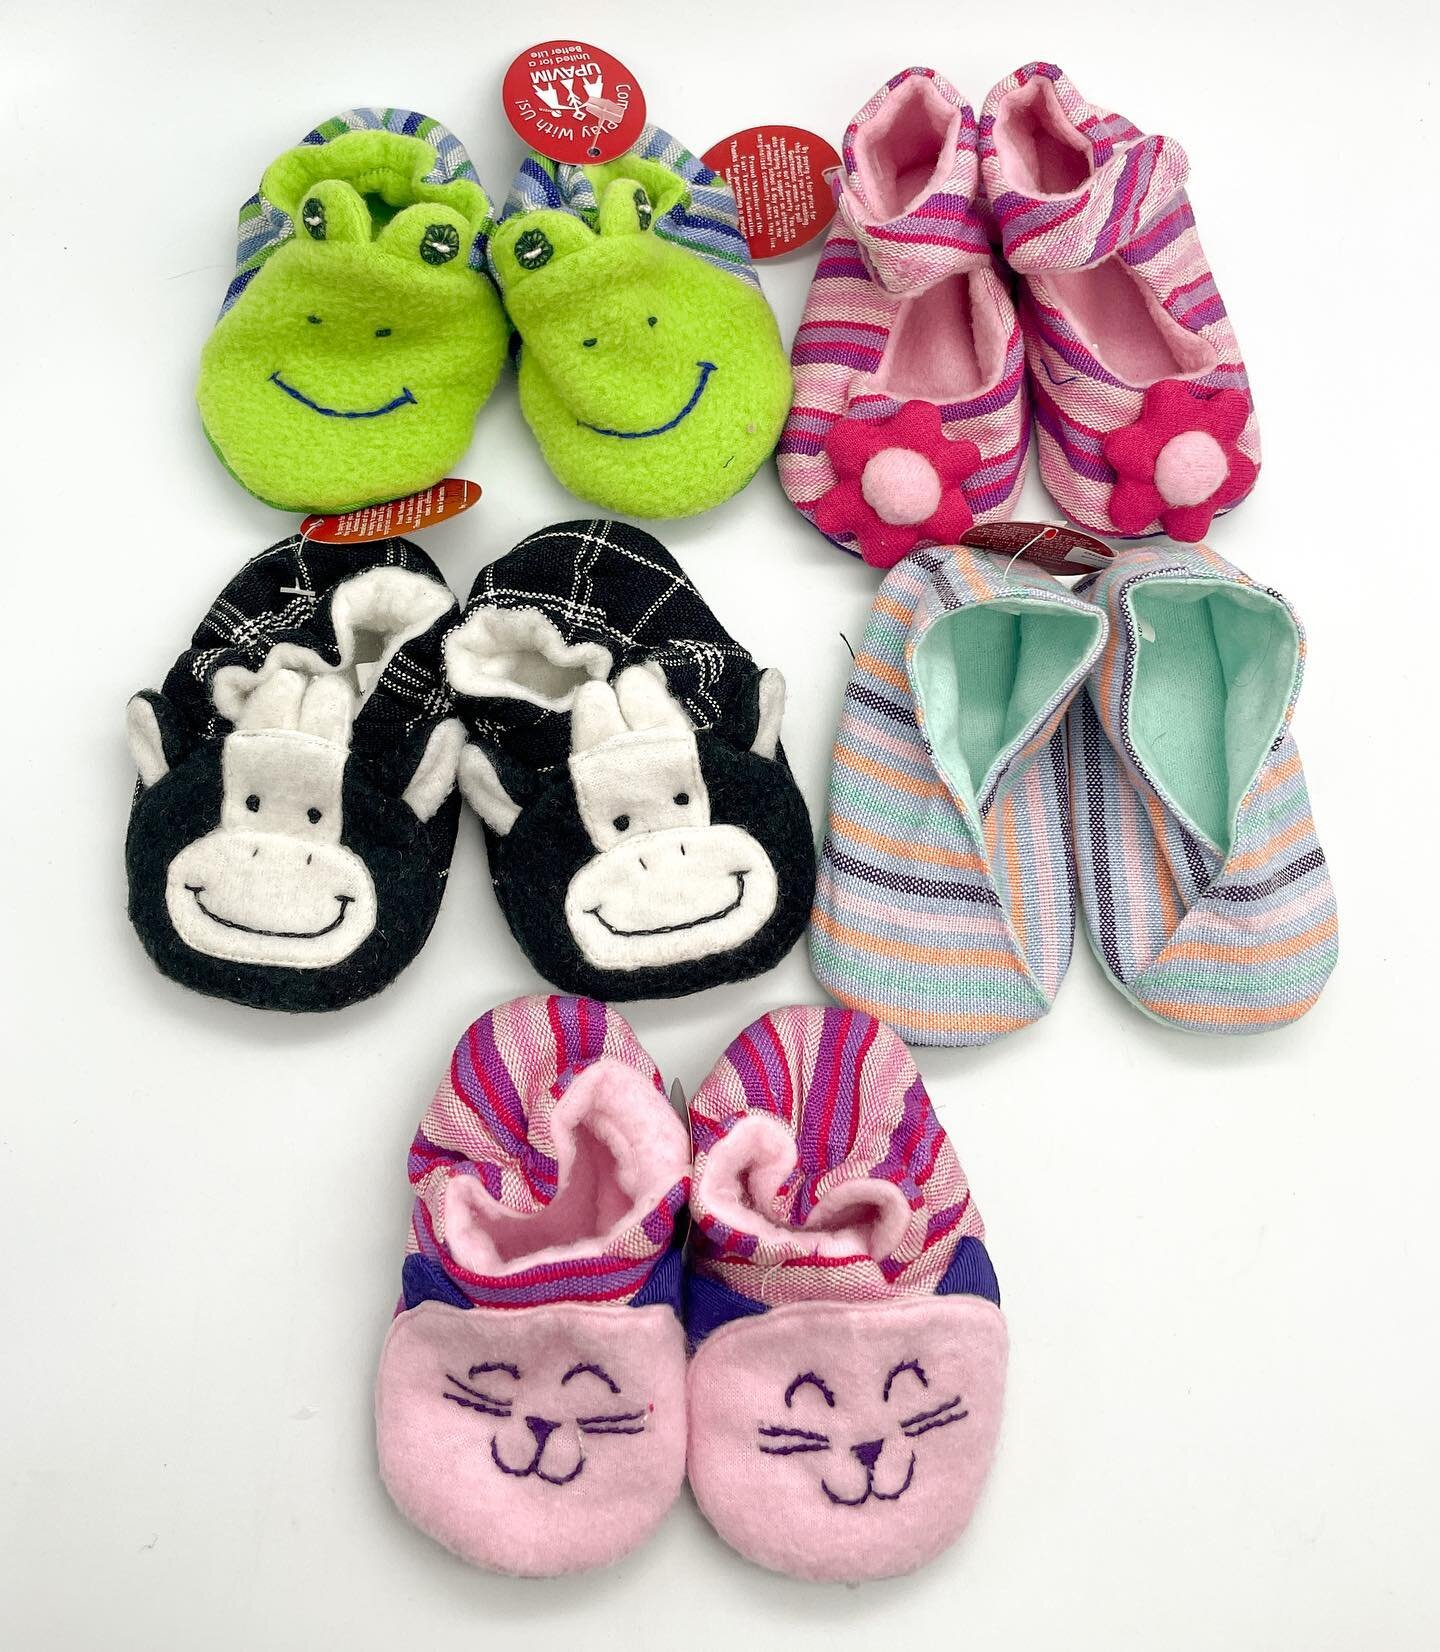 New items just in 🤩

How cute are the baby shoes and catnip mice?